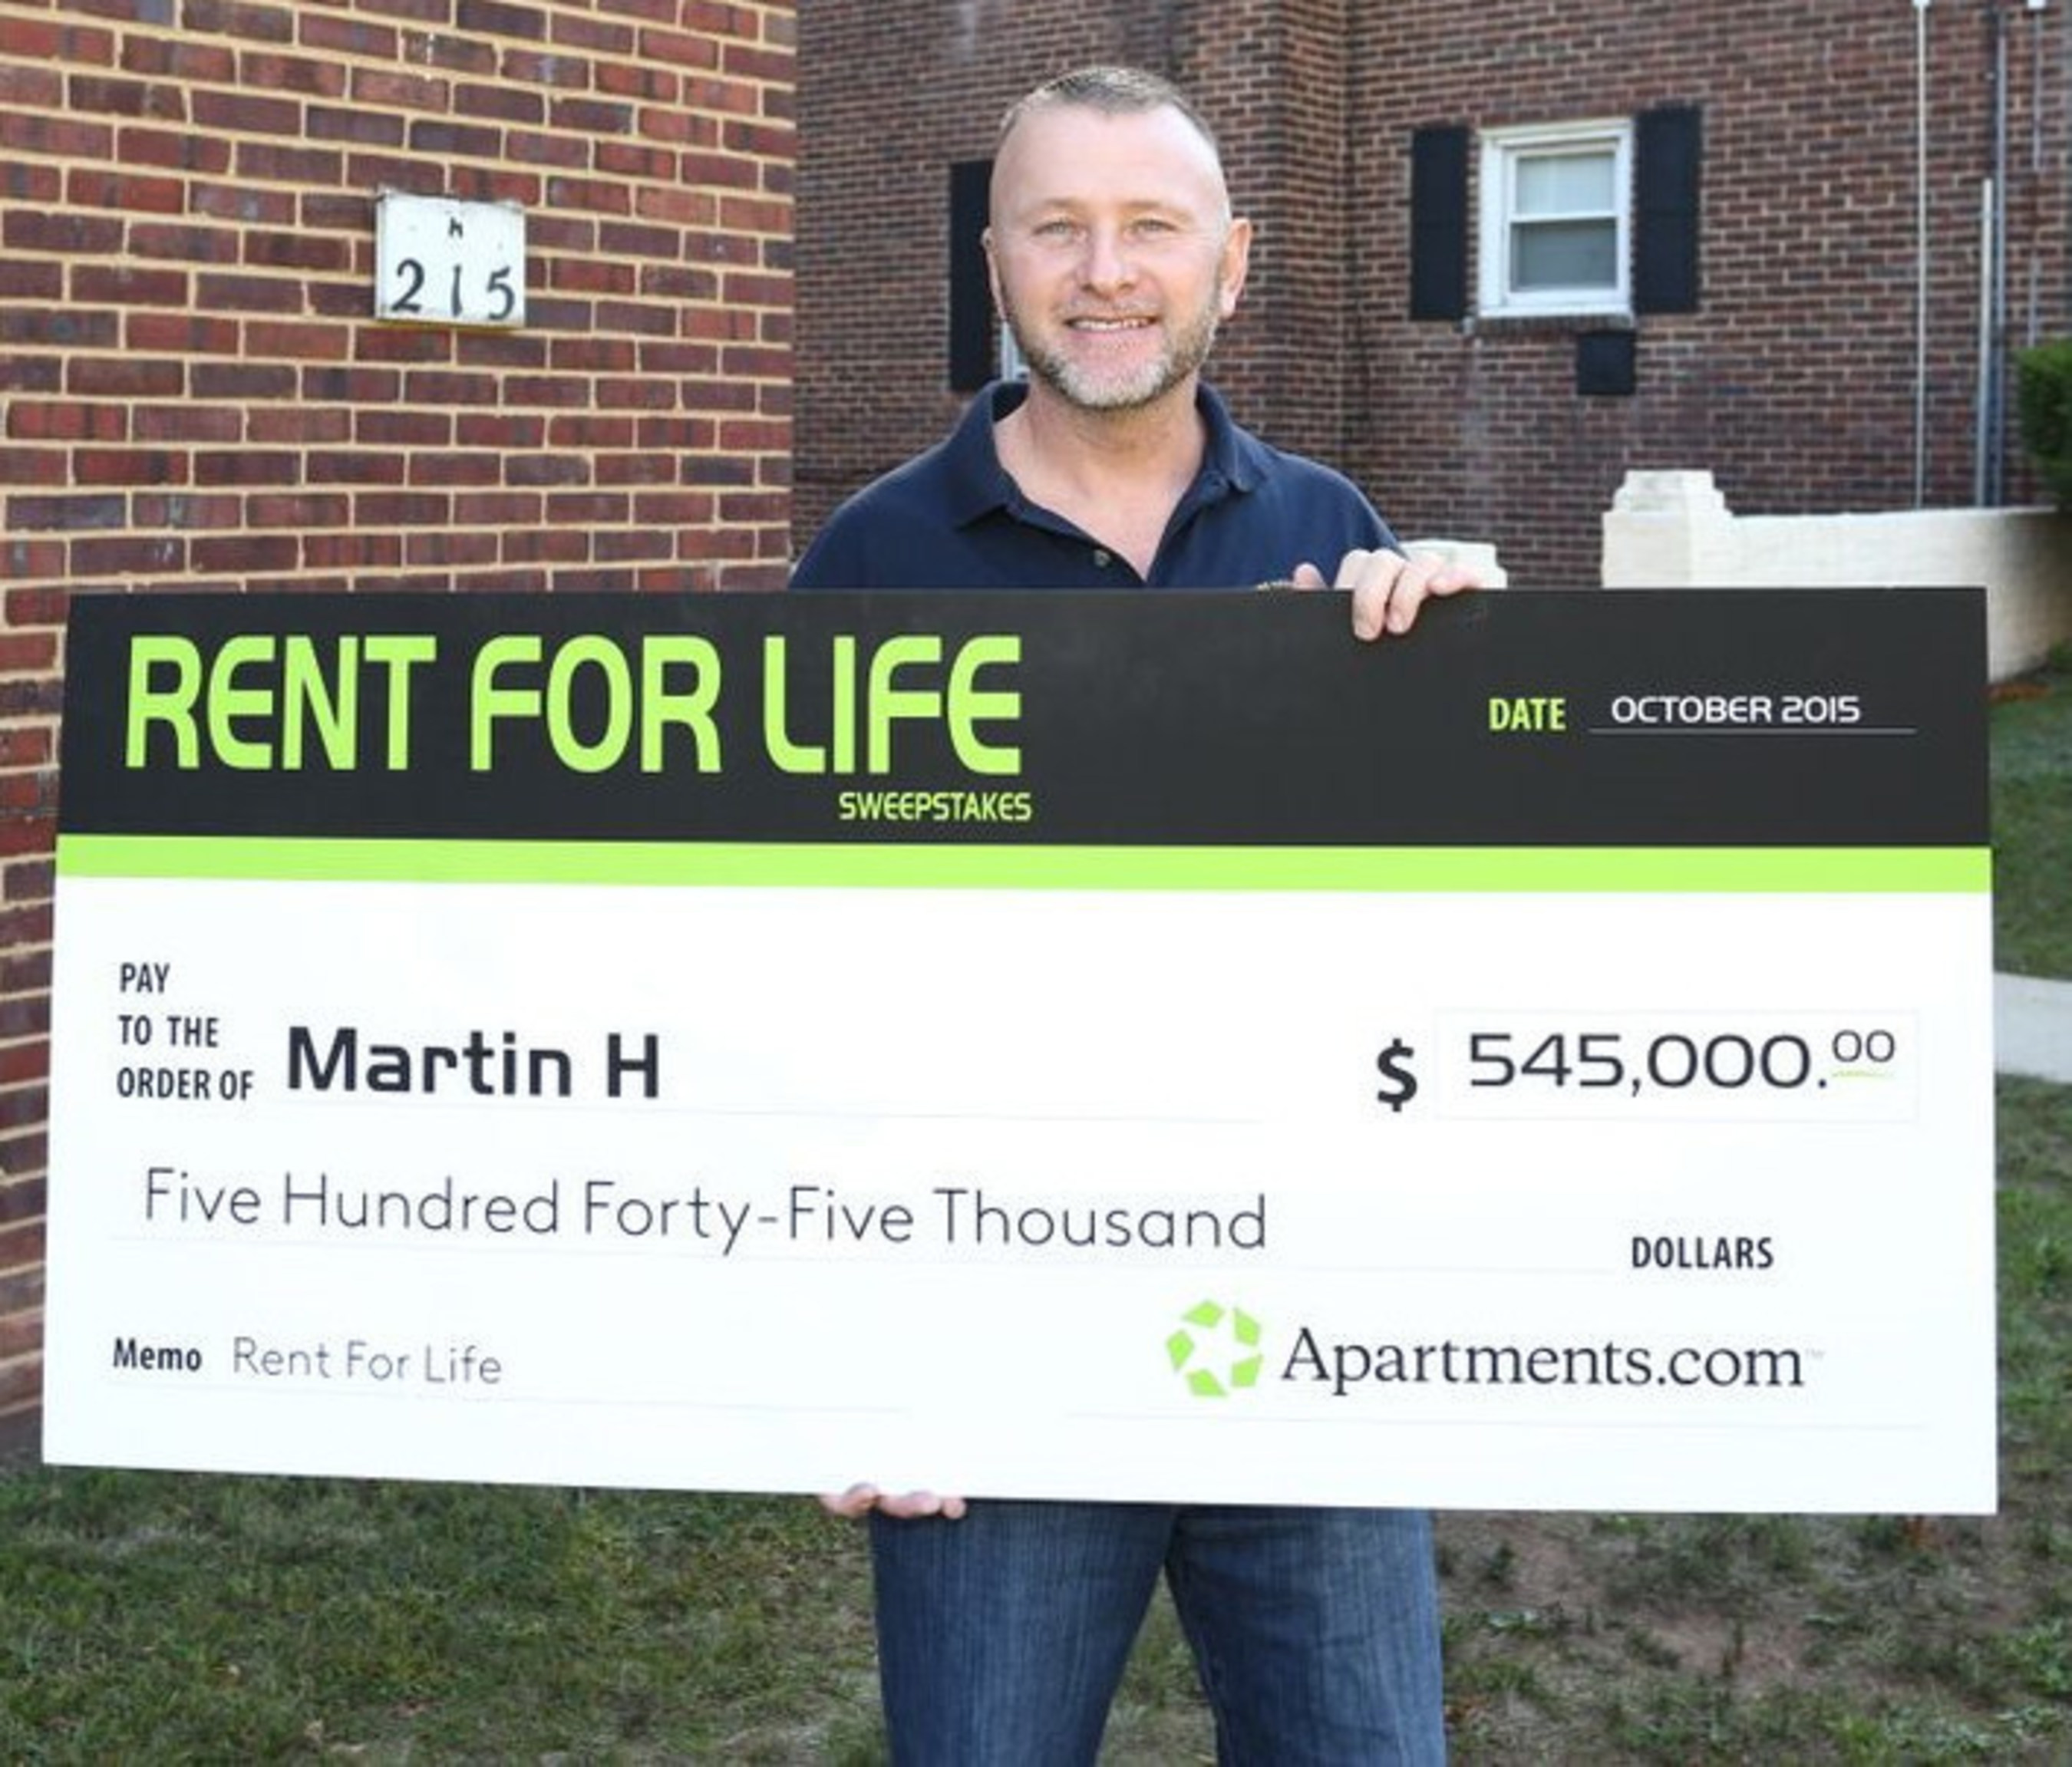 Apartments.com named Martin Hudak of Woodbridge, N.J., the winner of its "Rent for Life" sweepstakes today, presenting the lucky renter with a check for $545,000 in recognition of his helpful apartment review. A utility contractor, engineer and New Jersey native, Hudak was randomly chosen from a group of more than 155,000 entrants - each of whom submitted a review of his or her apartment or community during the 12-week sweepstakes period.